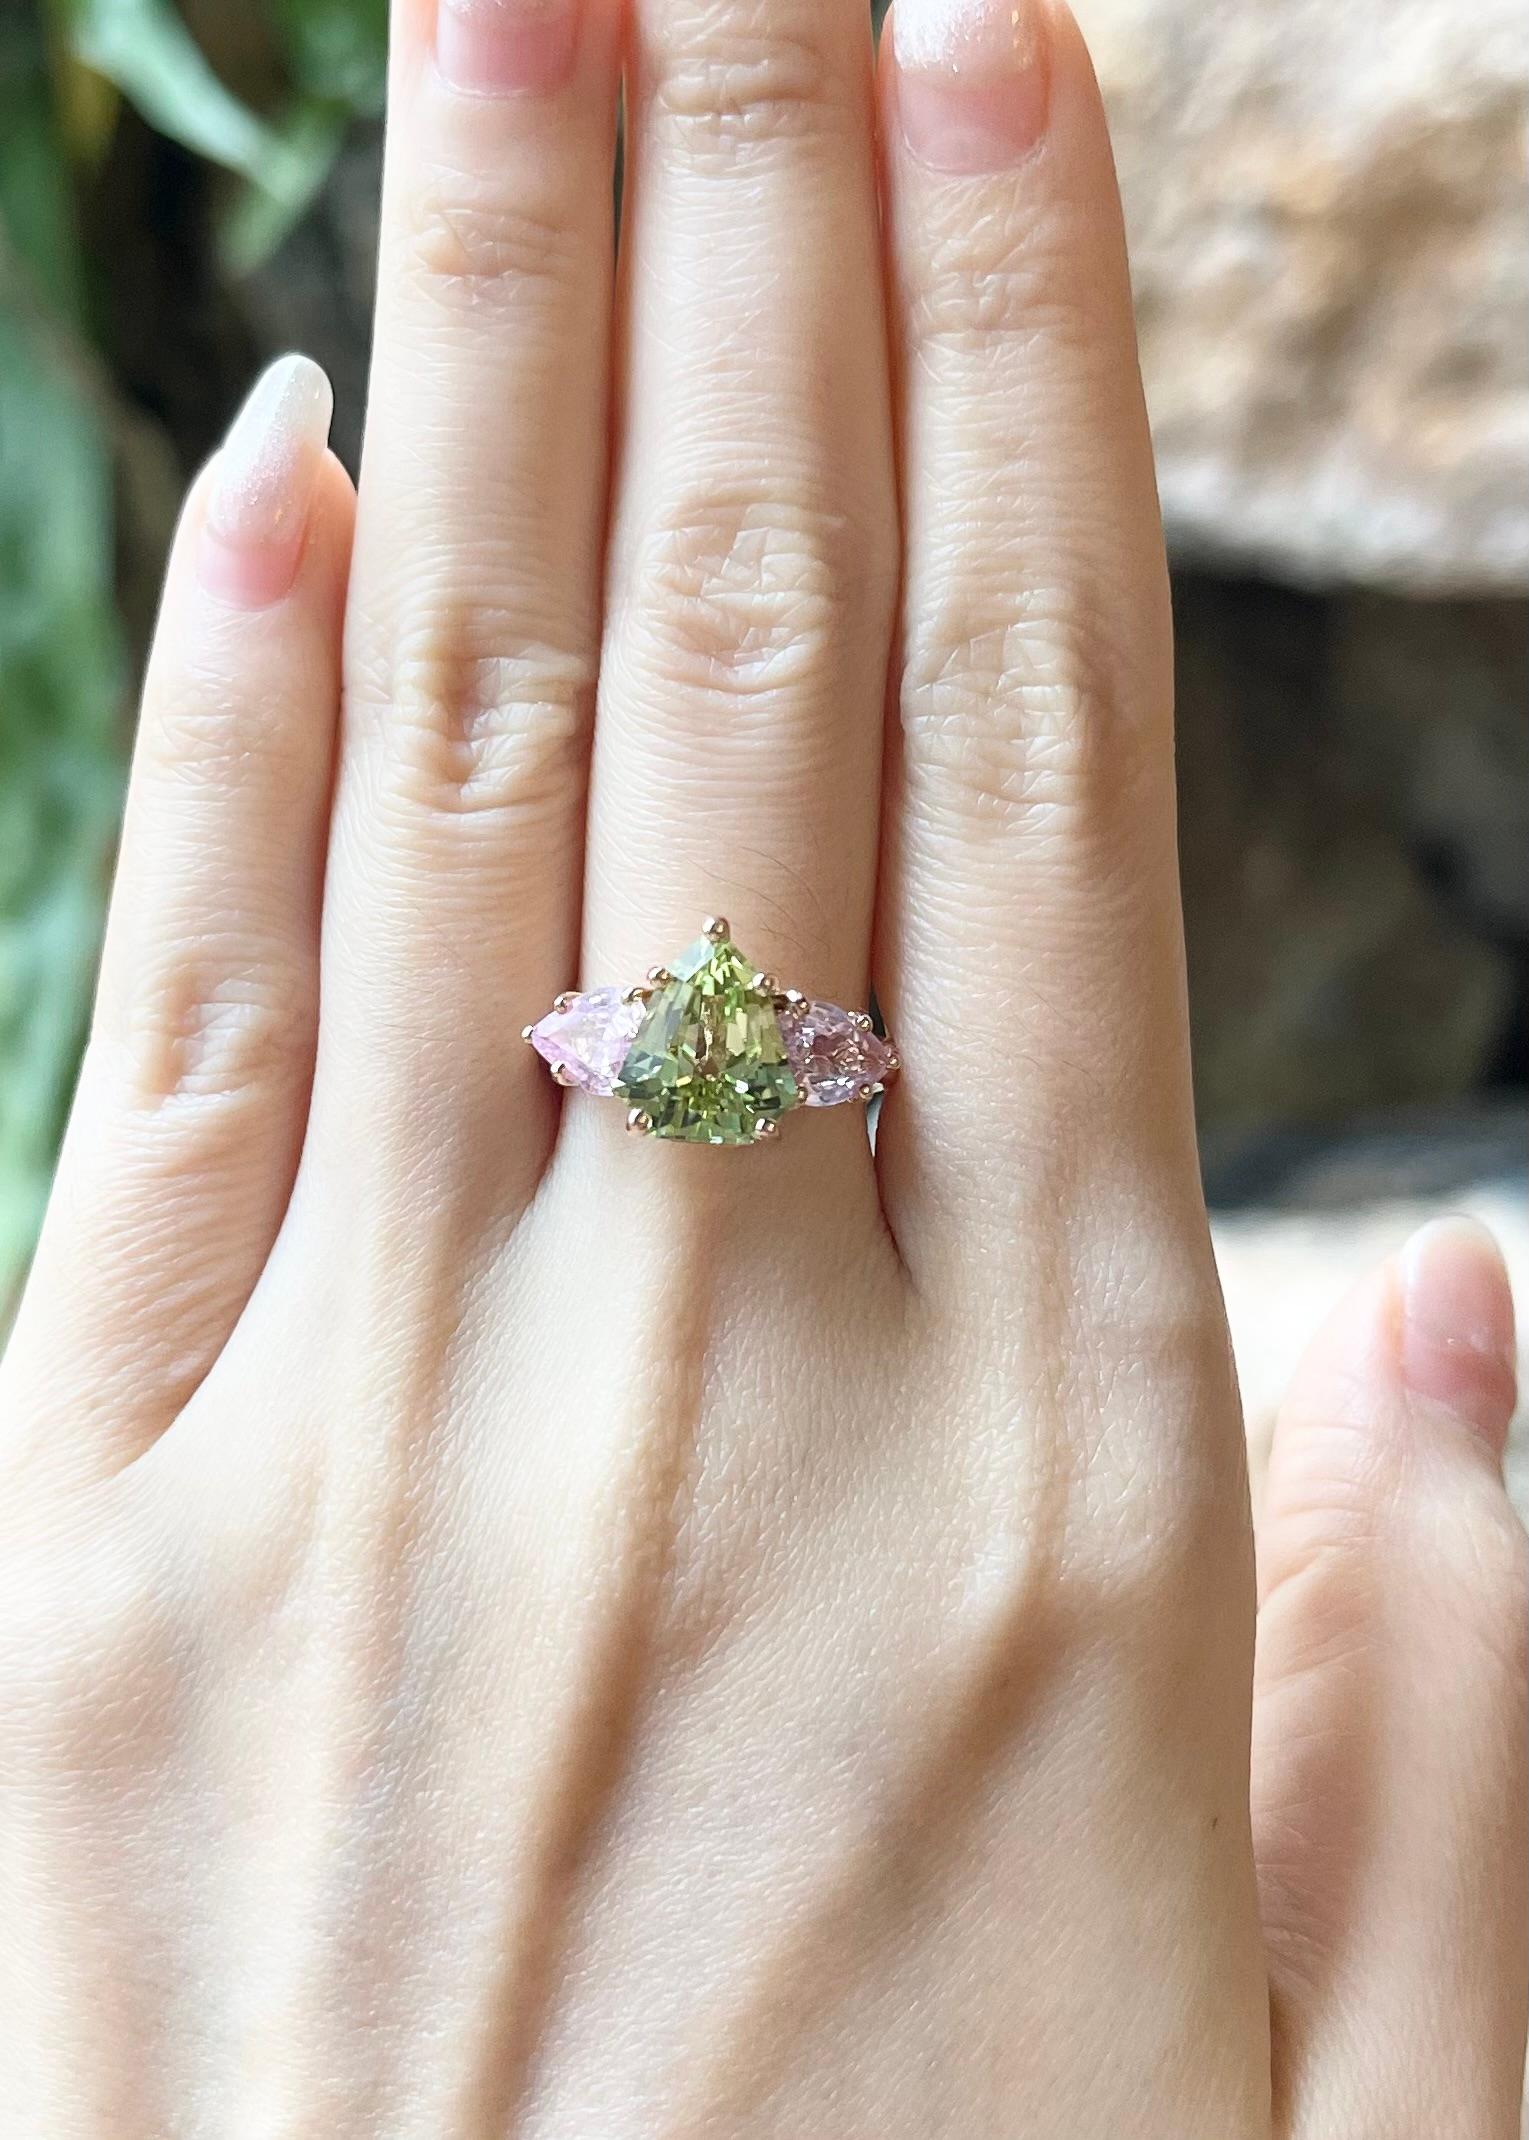 Green Tourmaline 3.18 carats with Pink Sapphire 2.06 carats Ring set in 18K Rose Gold Settings

Width:  2.0 cm 
Length: 1.1 cm
Ring Size: 52
Total Weight: 7.55 grams

